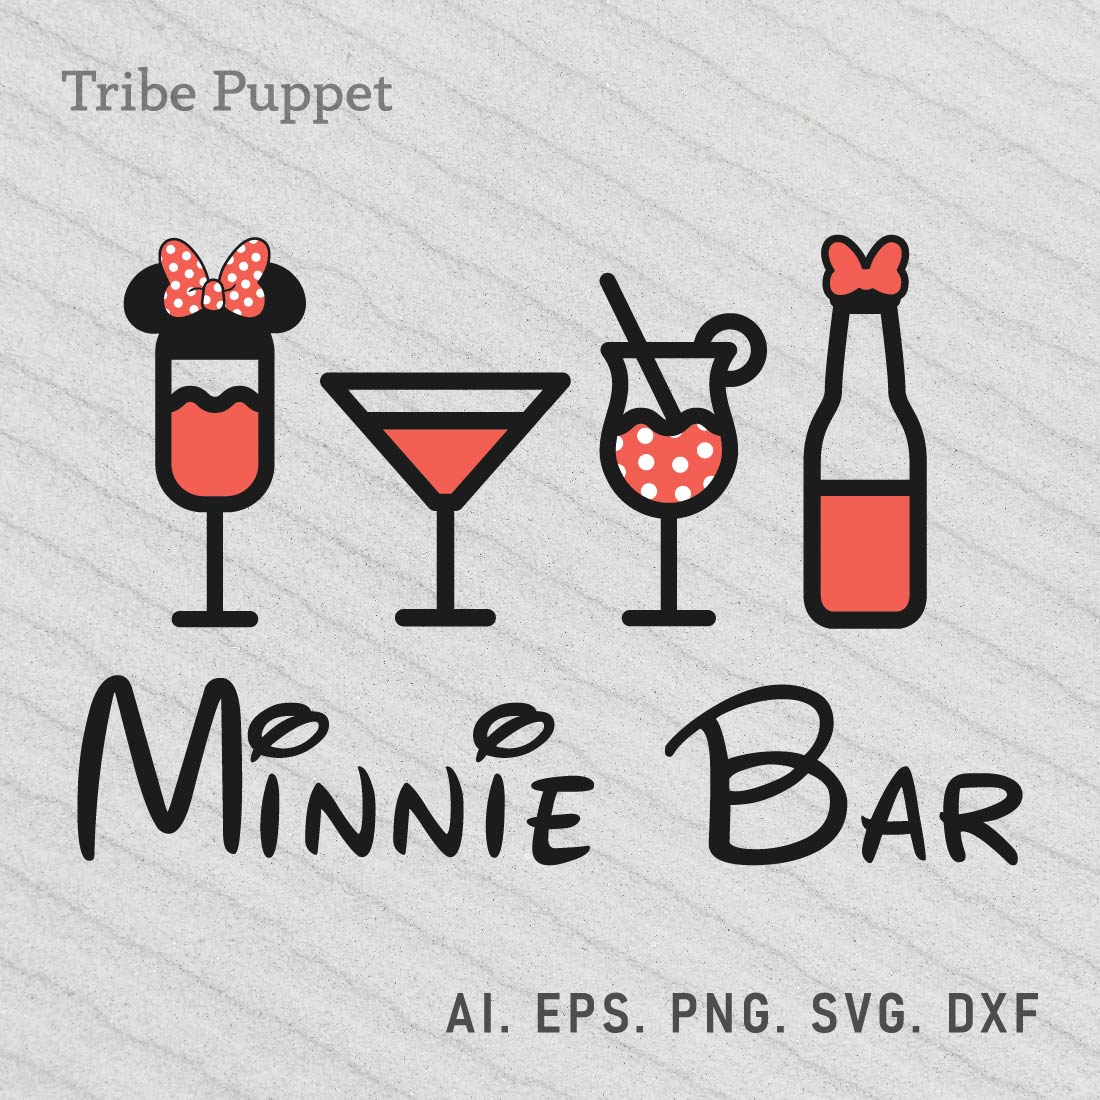 Minnie Bar preview image.